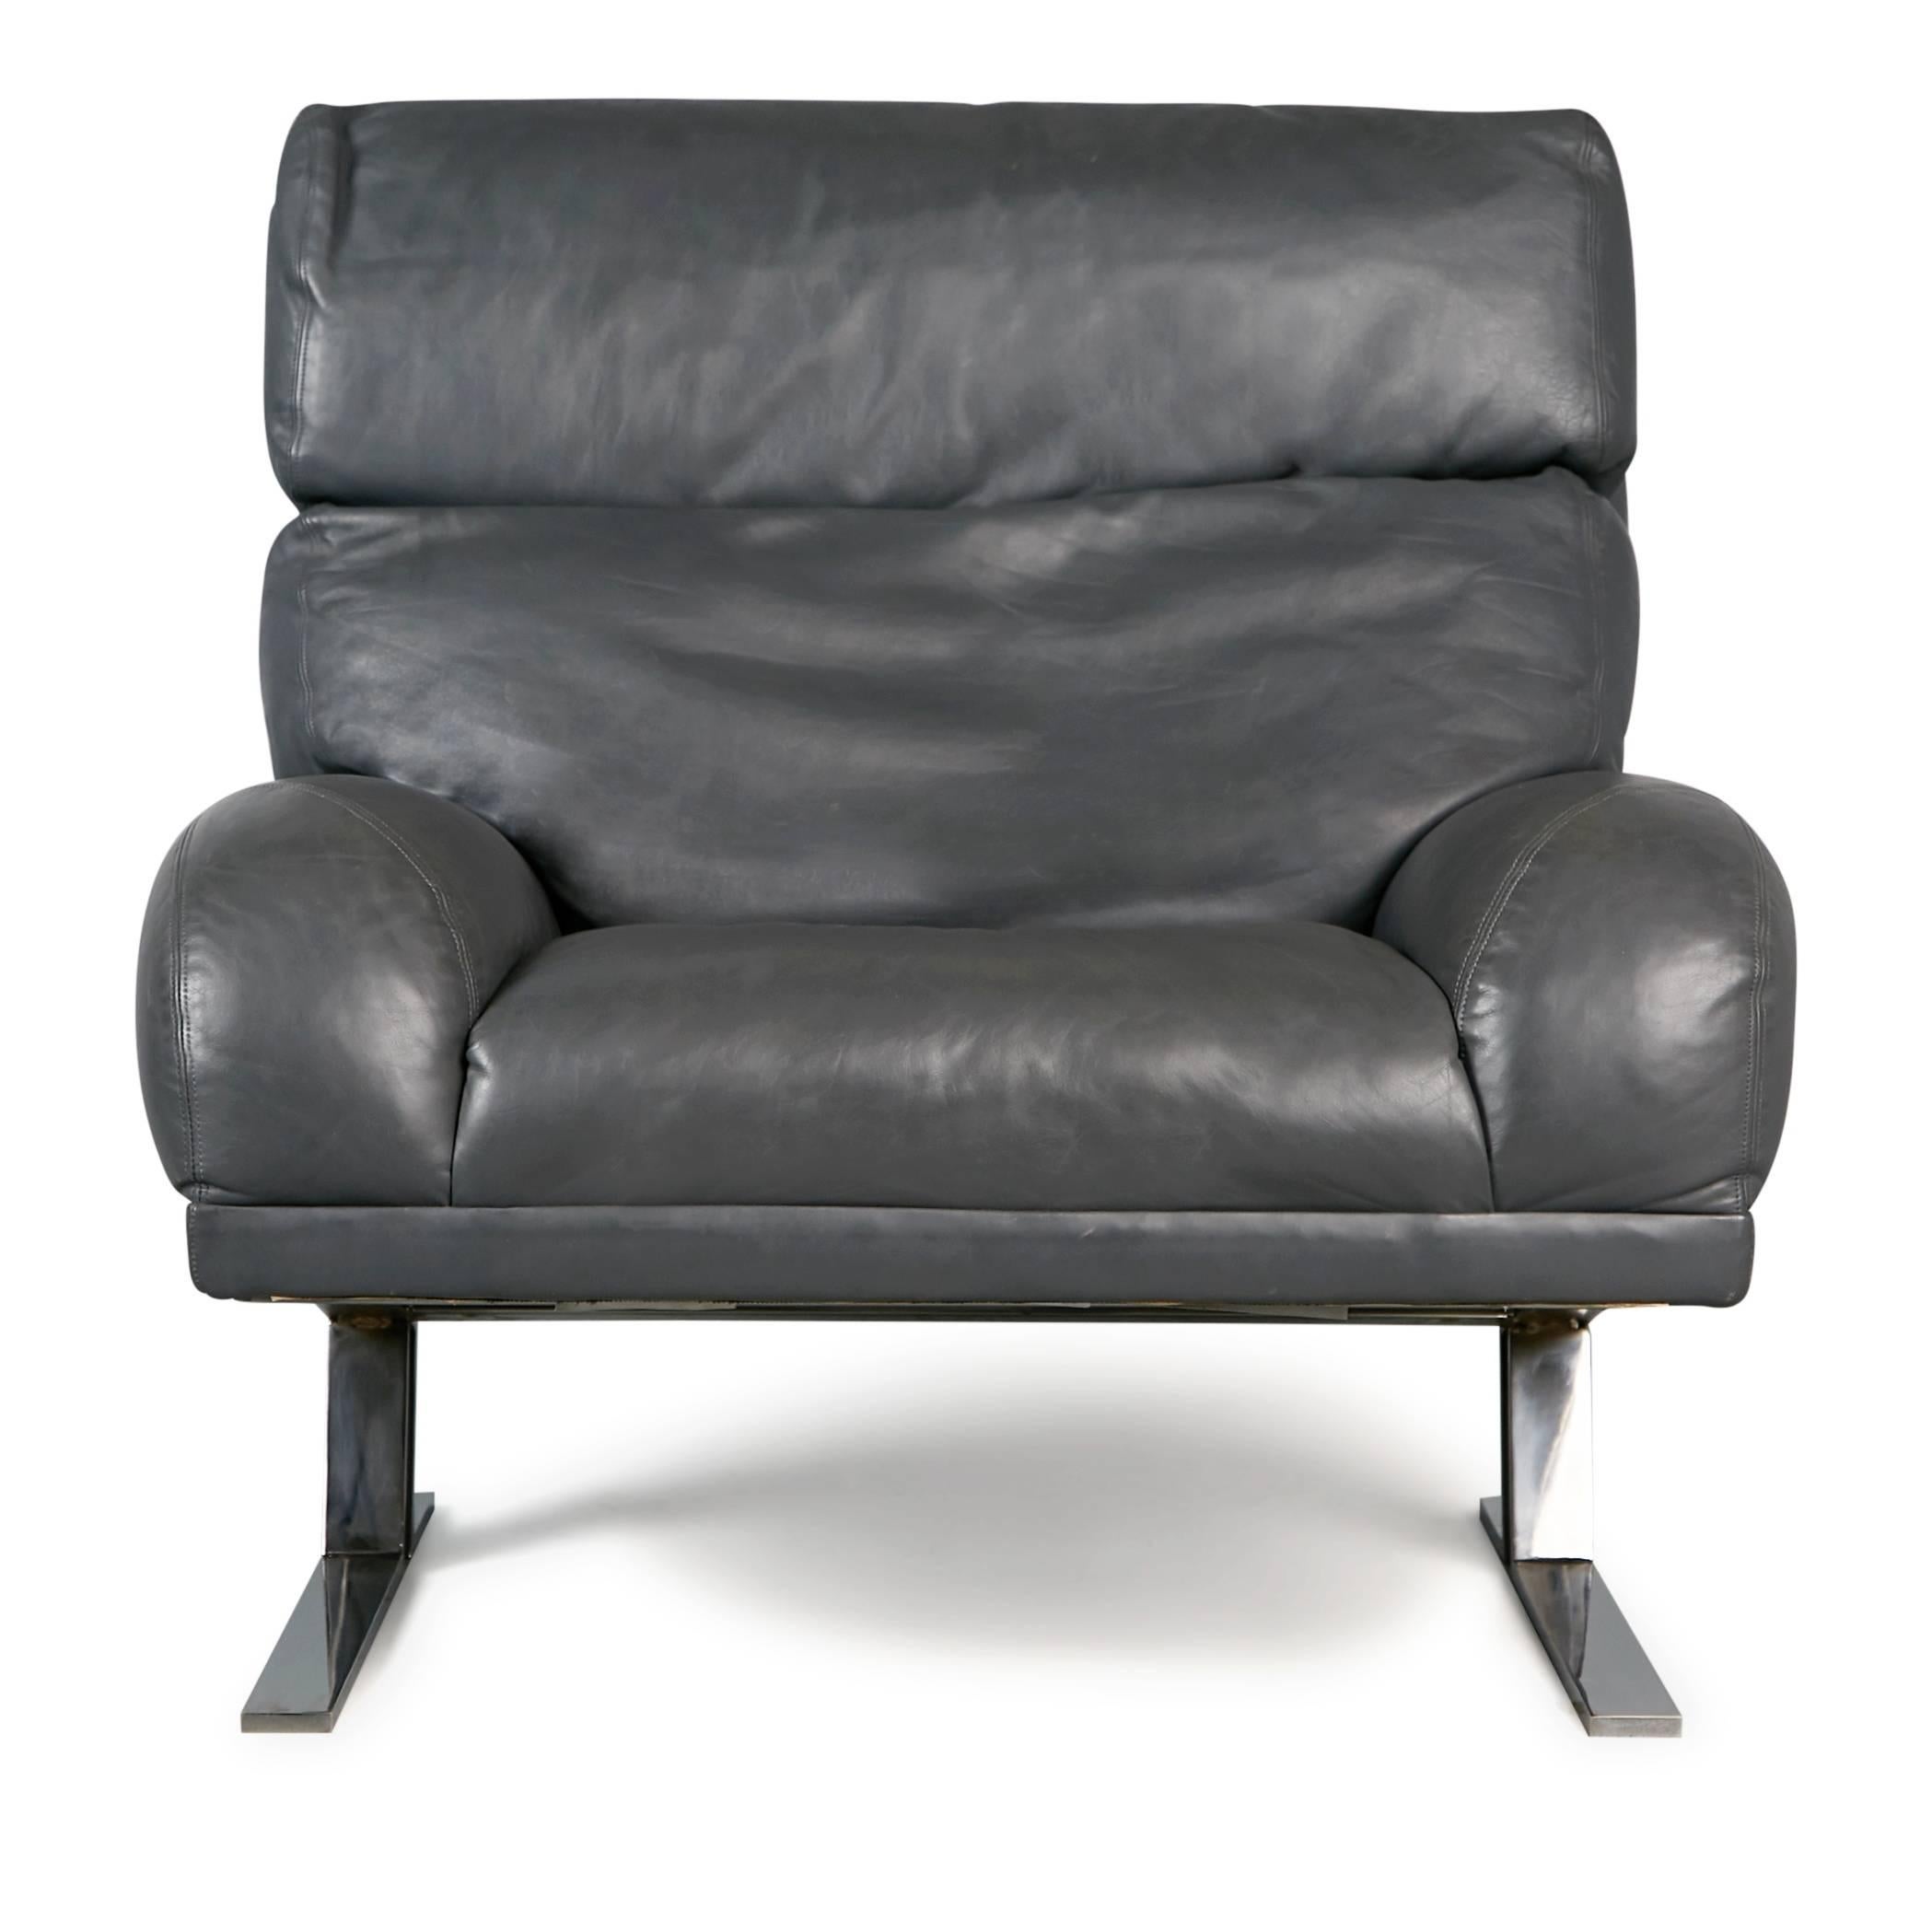 Mid-Century Modern Milo Baughman Grey Leather Lounge Chair and Ottoman for Directional, circa 1970